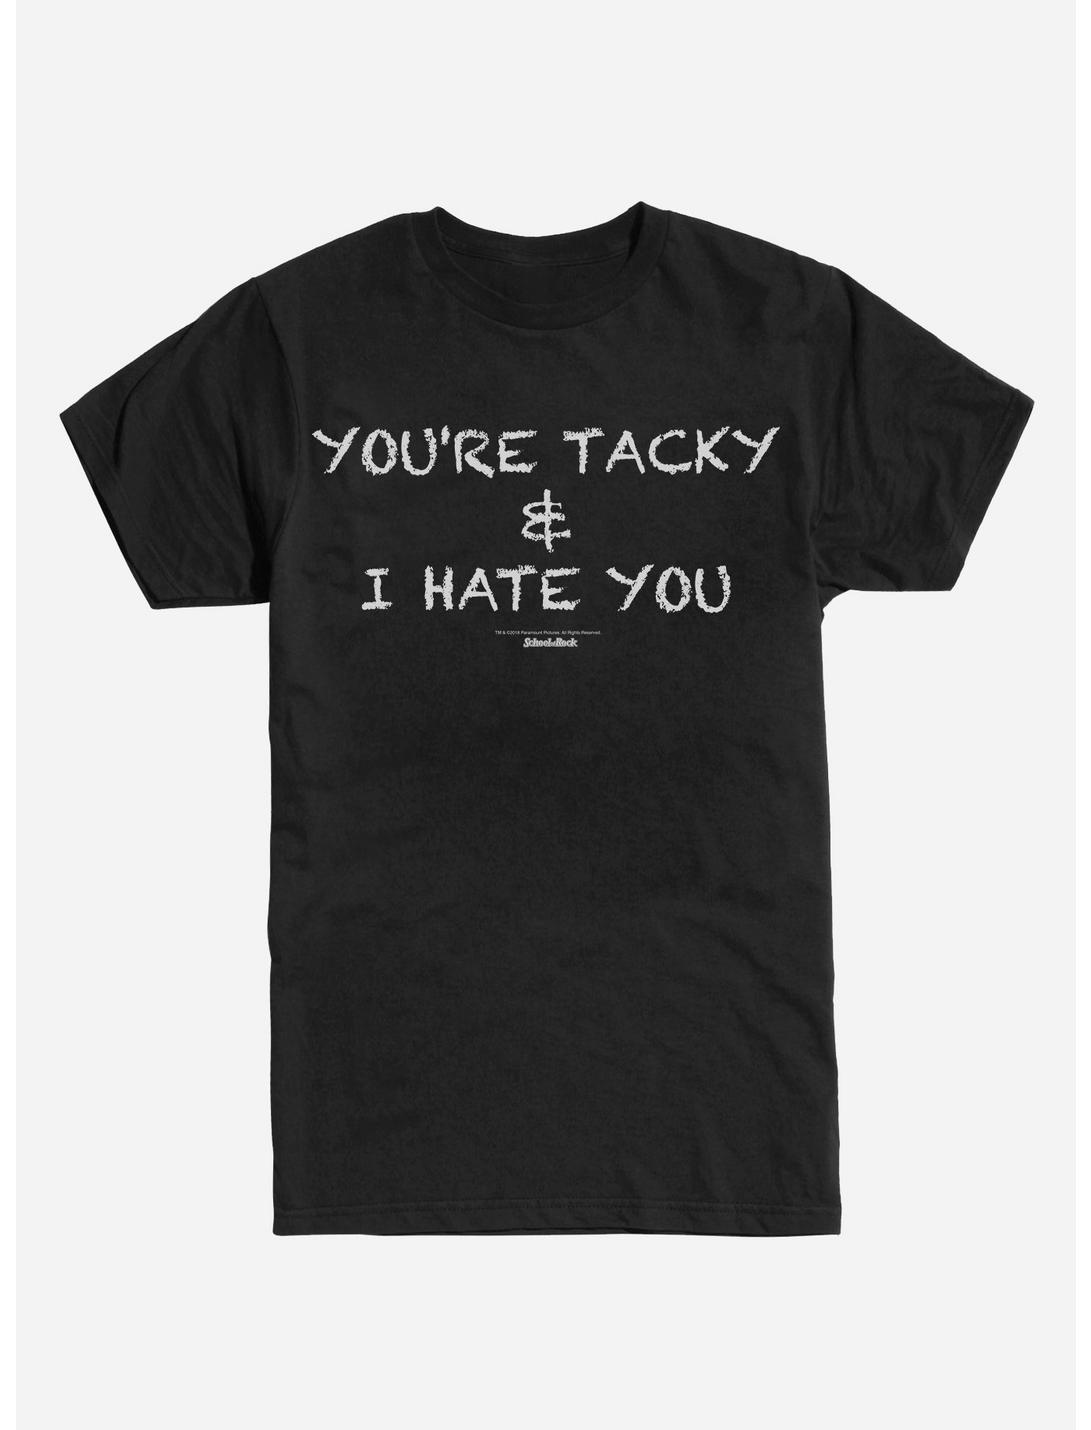 School of Rock You're Tacky and I Hate You T-Shirt, BLACK, hi-res